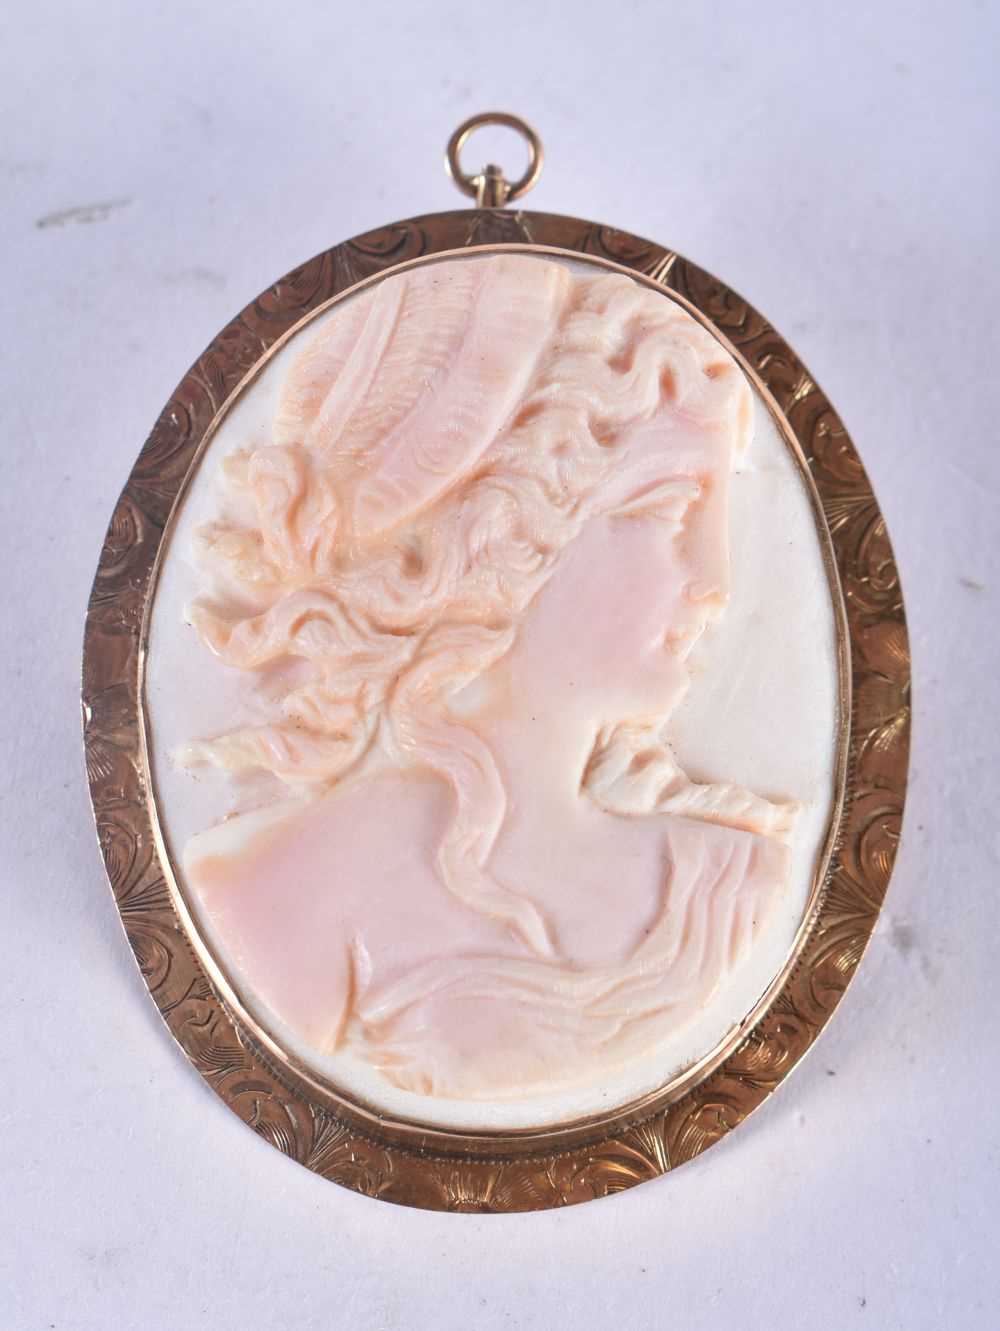 An Antique Gold Mounted Cameo Brooch / Pendant in the Classical Style. 4.5 cm x 3.7cm, weight 13.5g